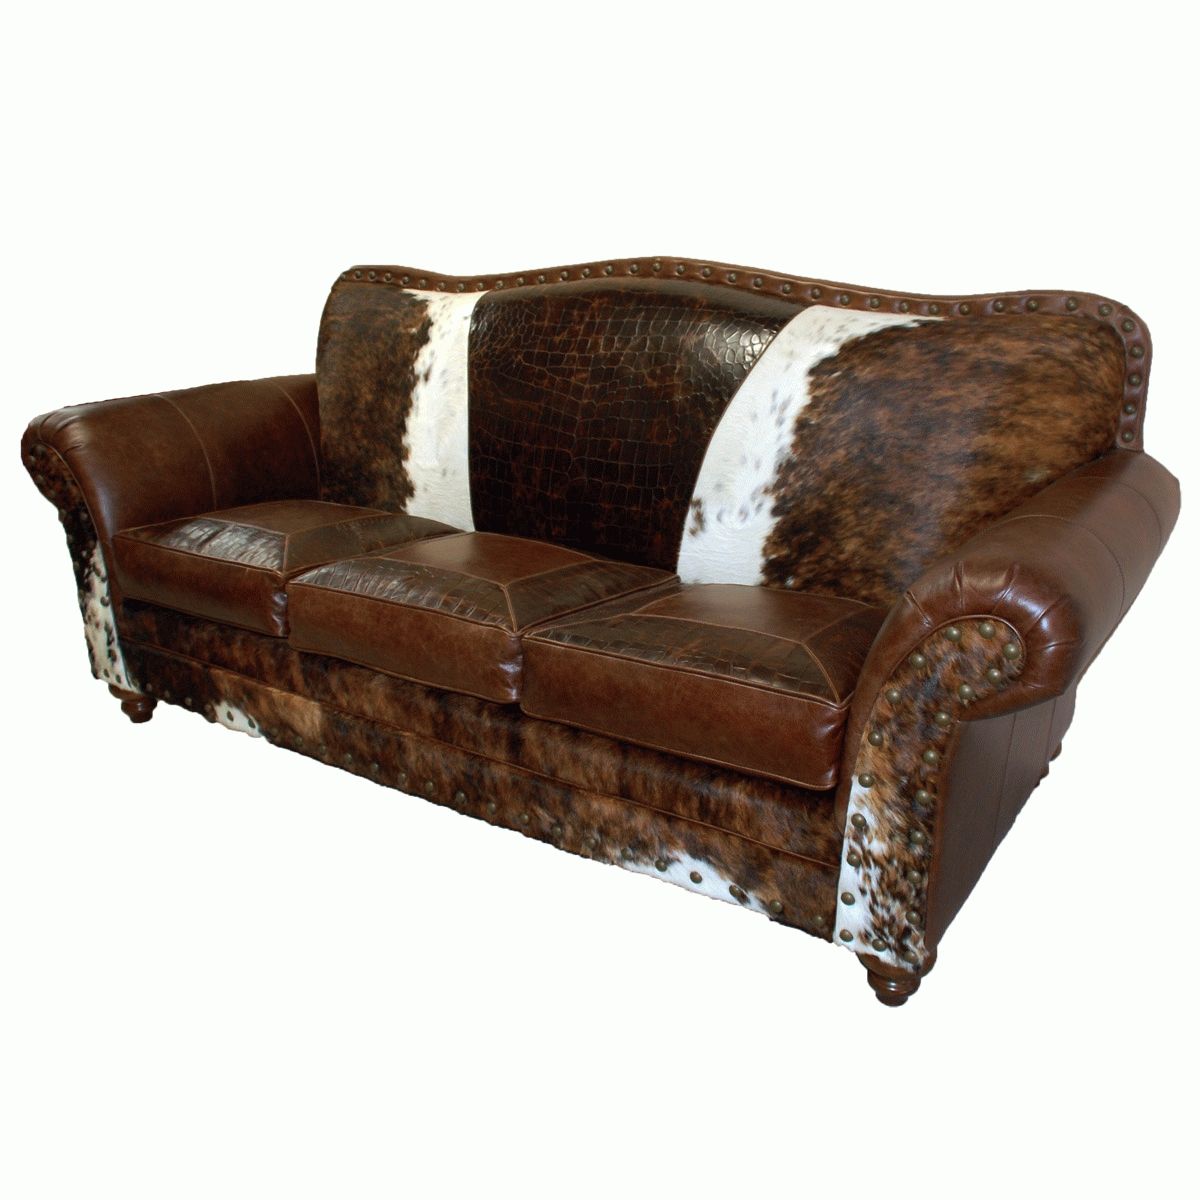 Western Leather Furniture & Cowboy Furnishings From Lones Star Pertaining To Cowhide Sofas (View 1 of 20)